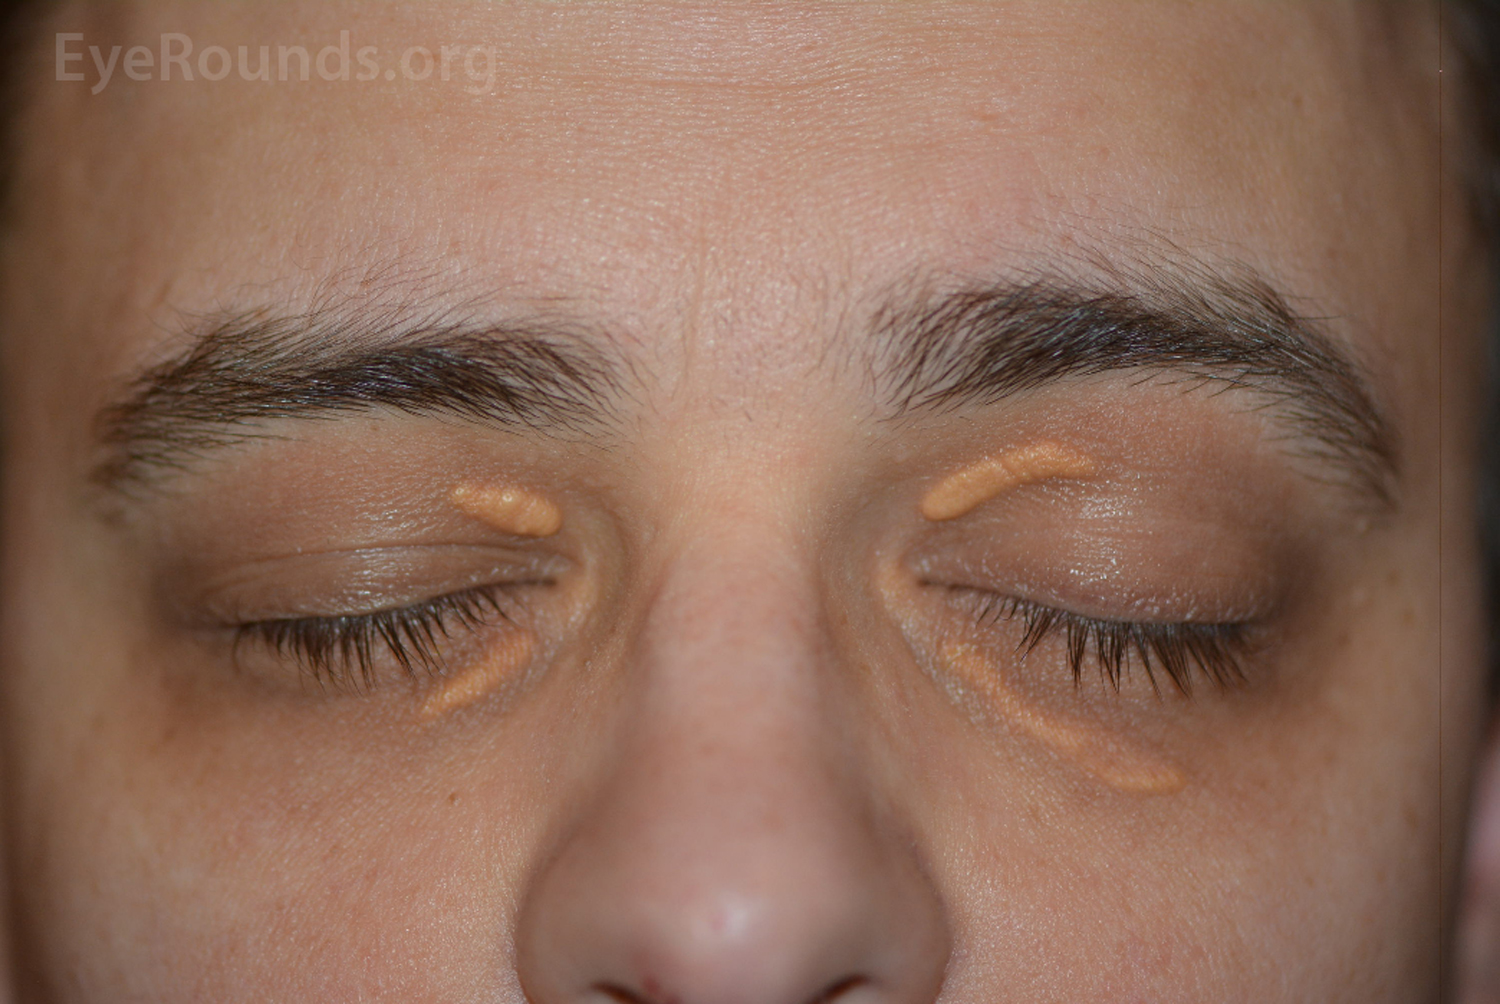 middle-aged man presented with bilateral symmetric yellowish lesions on the medial upper and lower eyelids